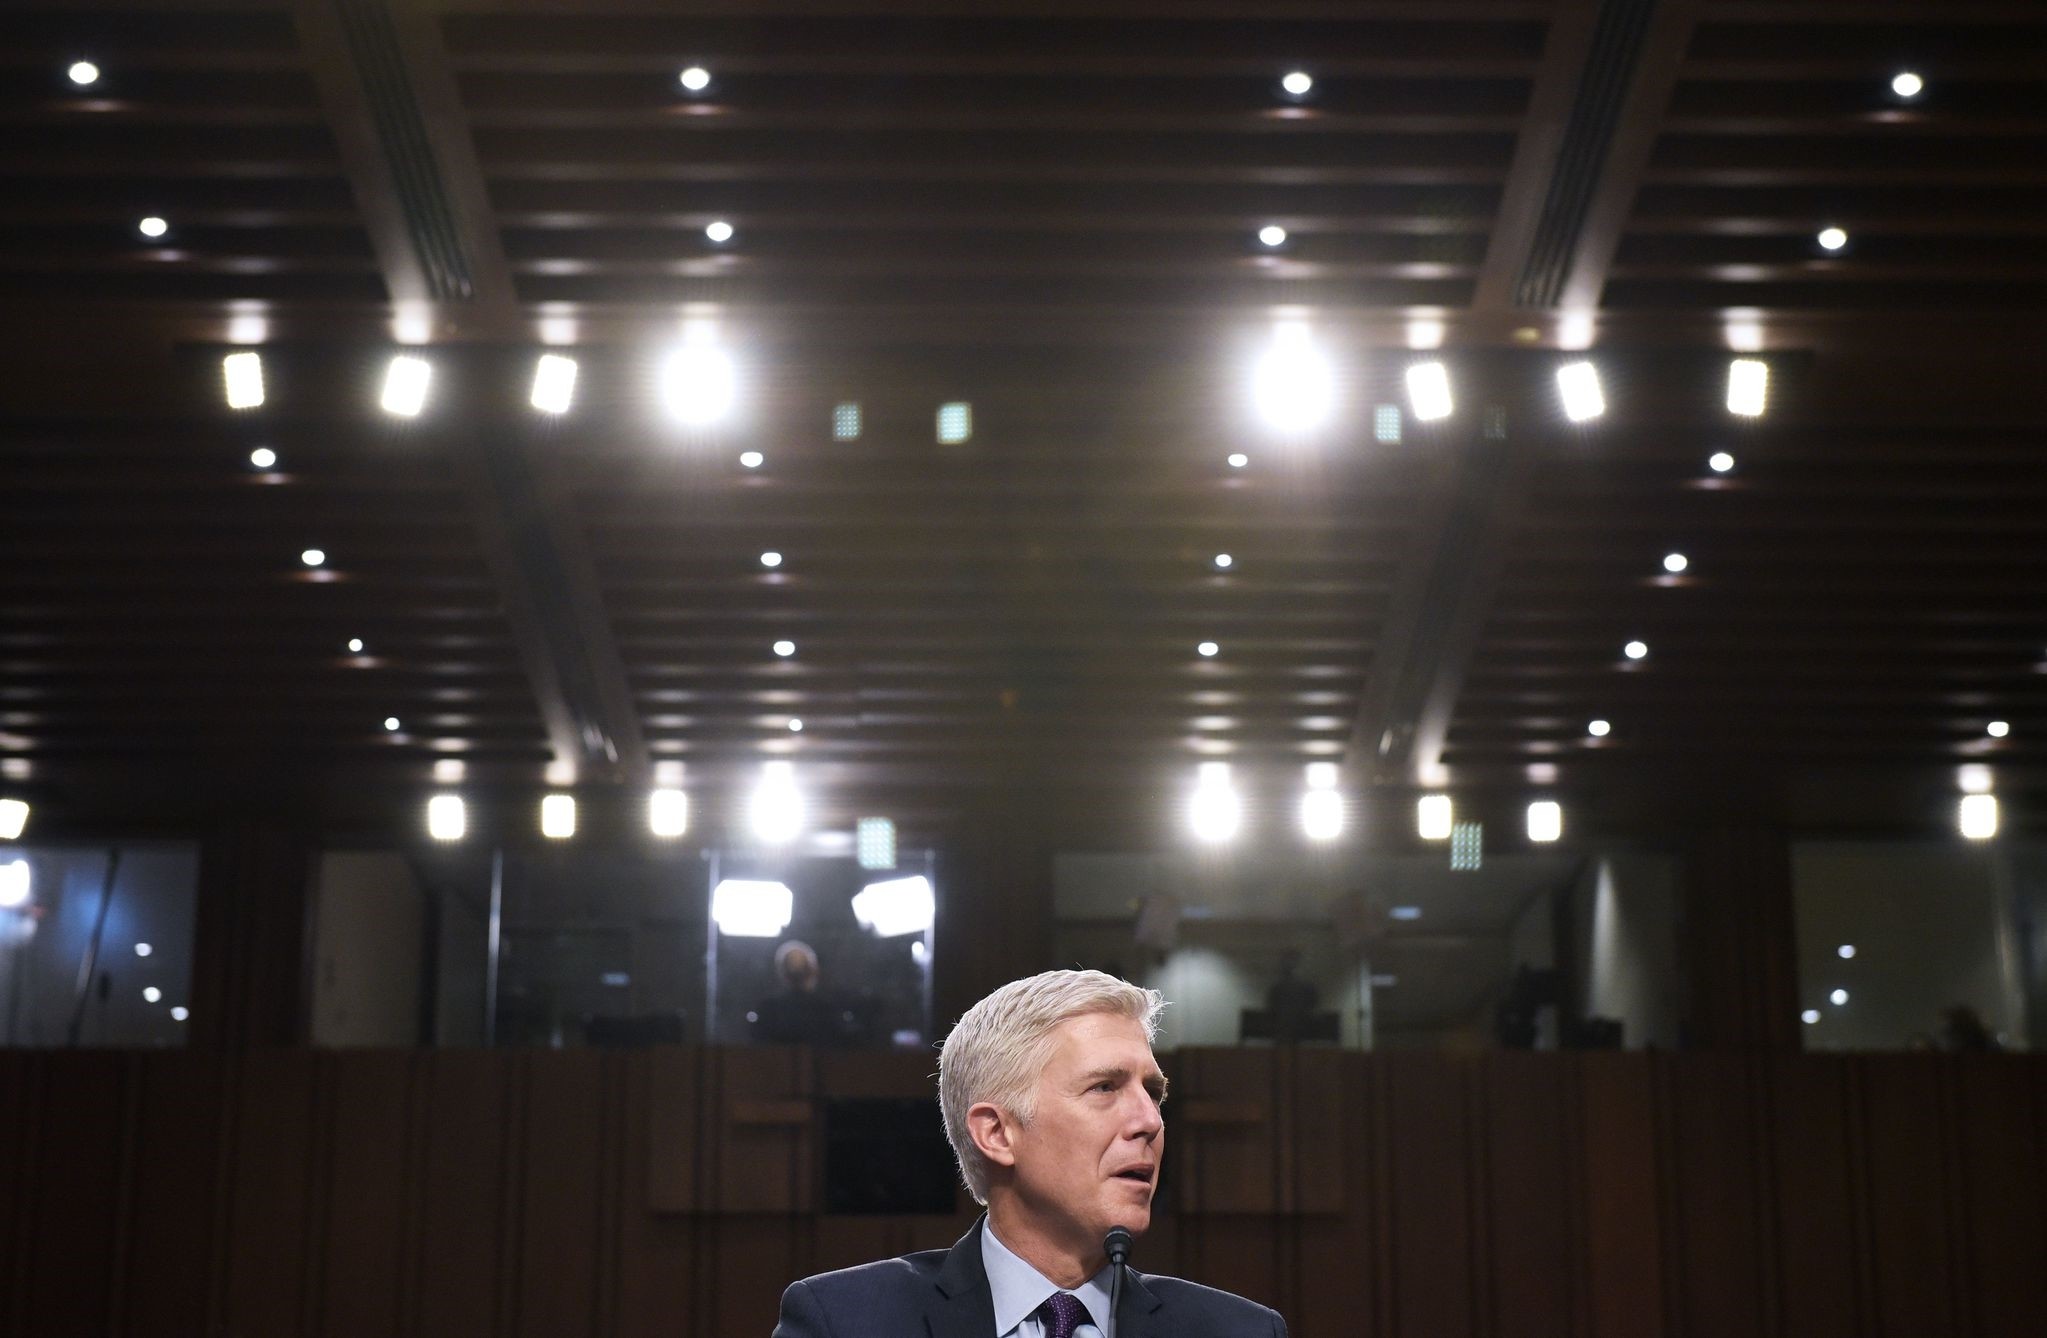 Neil Gorsuch testifies before the Senate Judiciary Committee on his nomination to be an associate justice of the US Supreme Court. (AFP Photo)